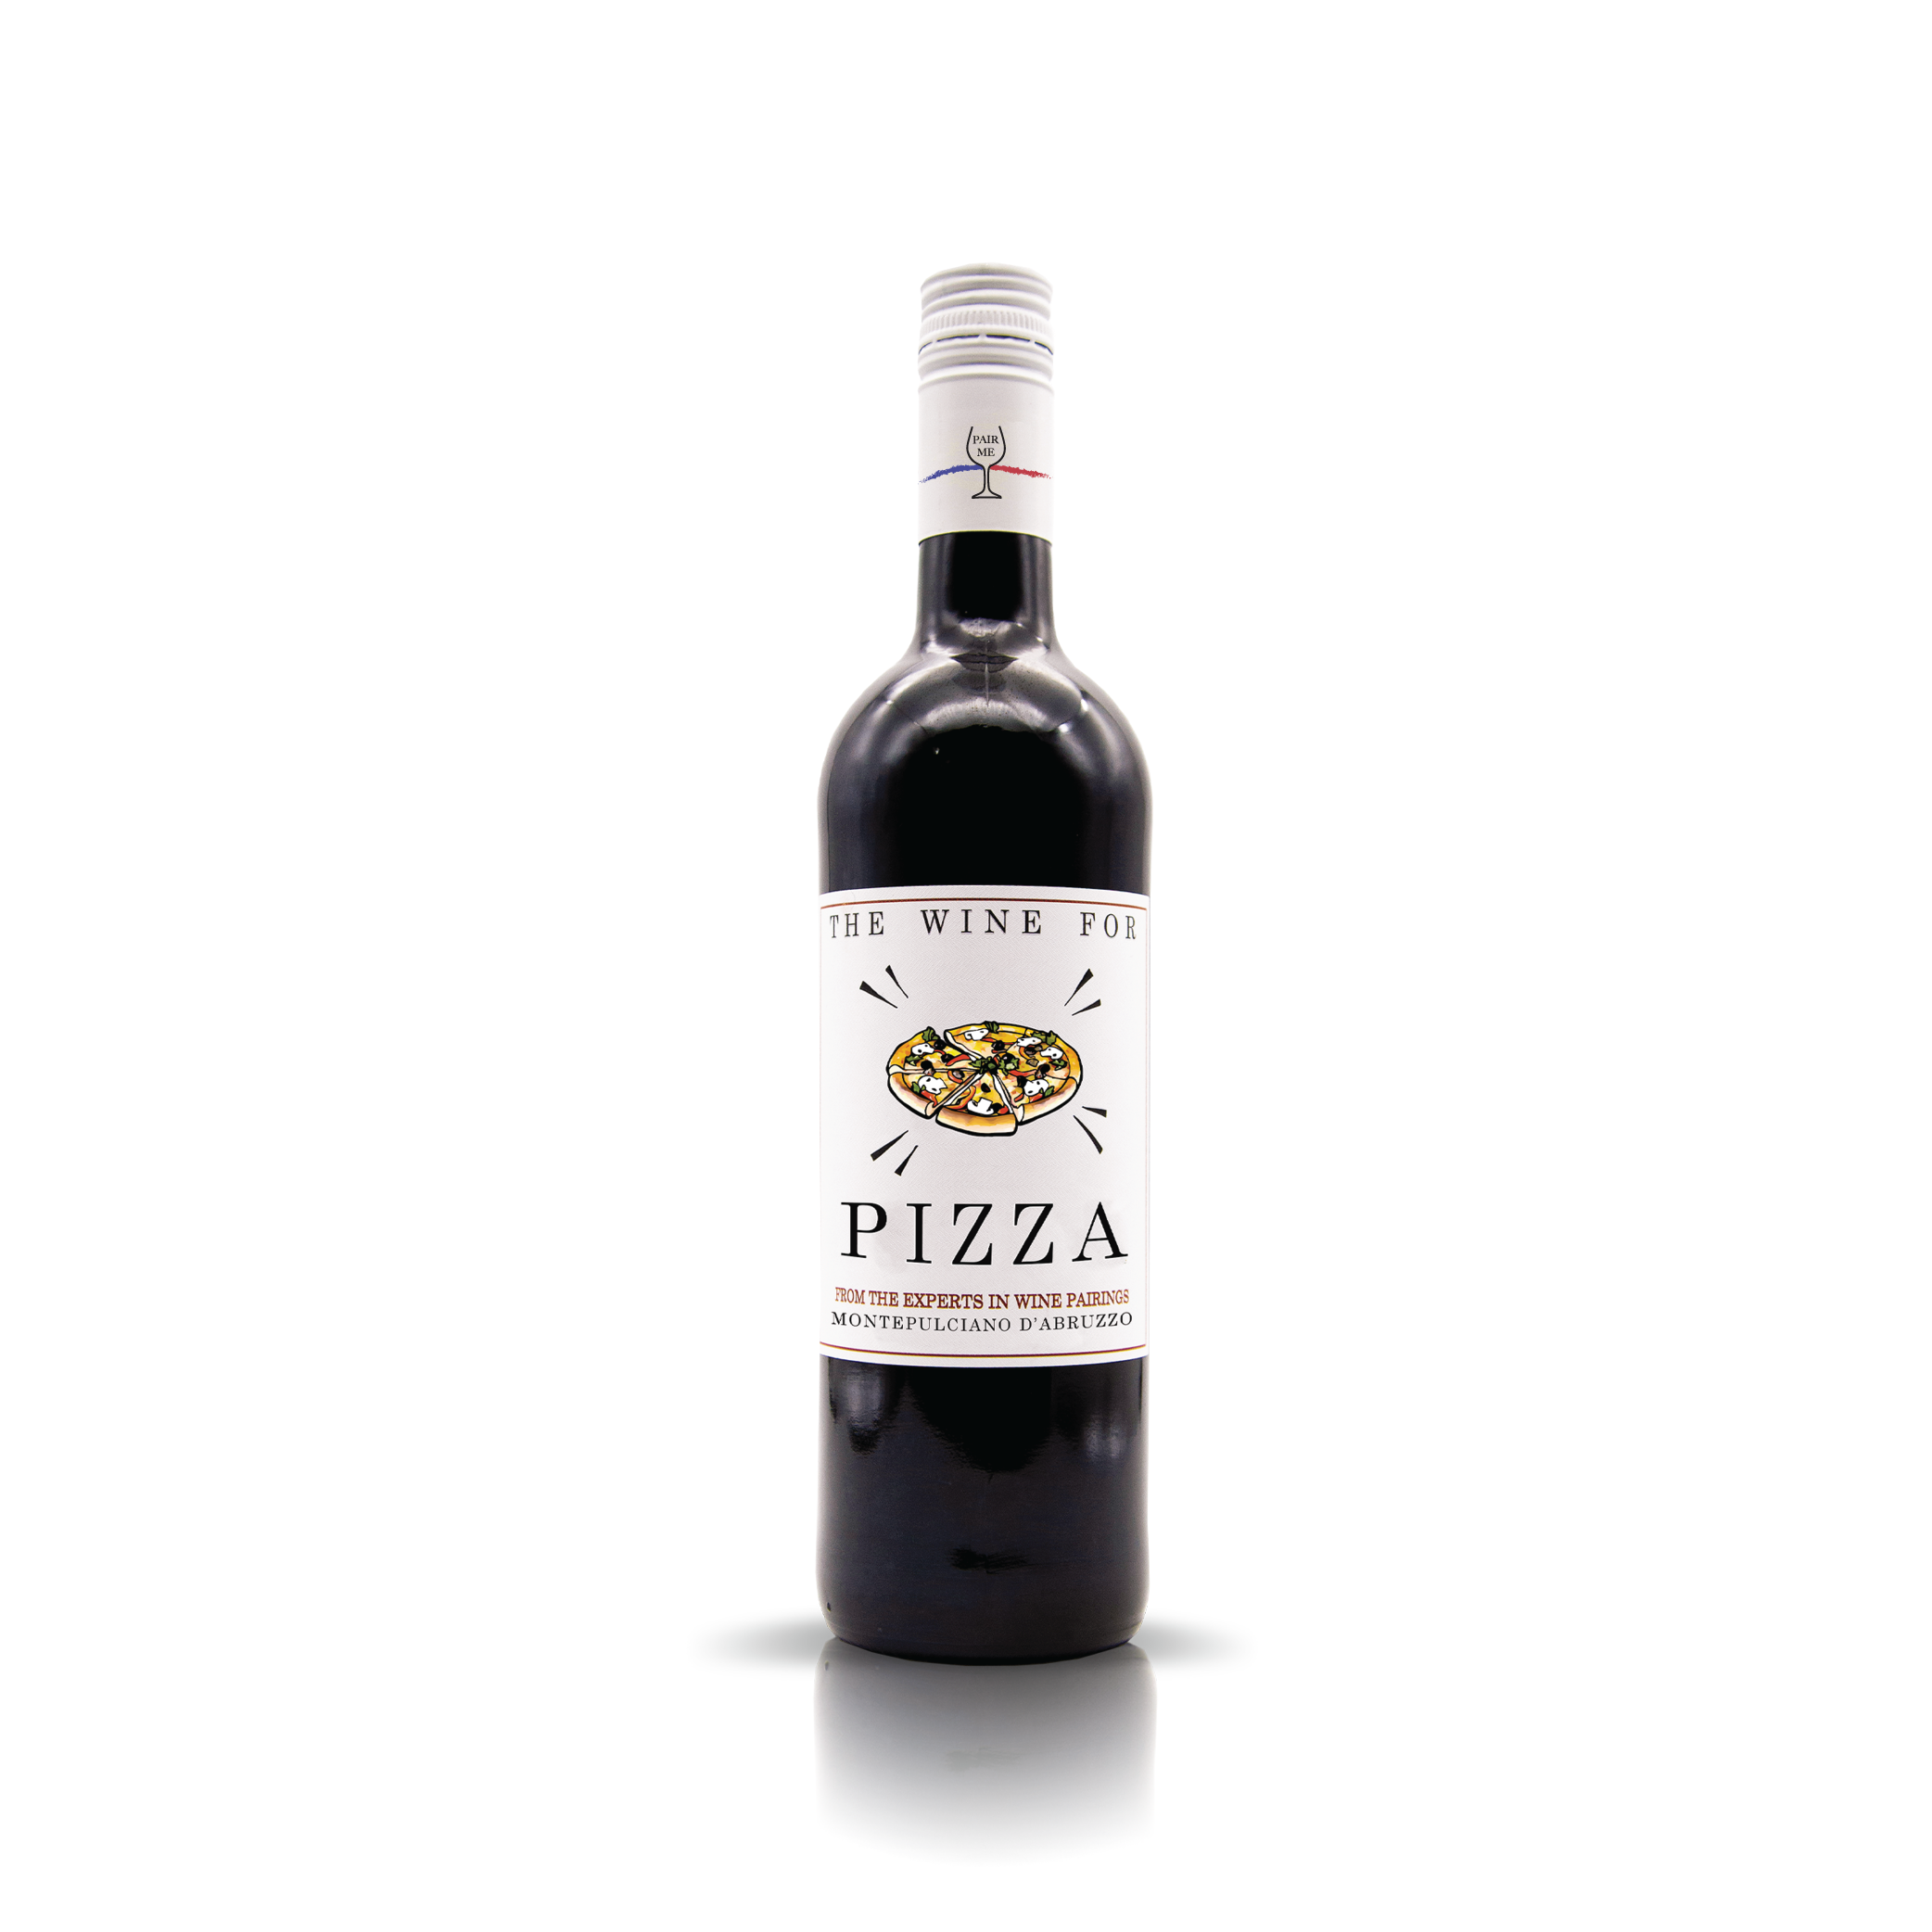 THE WINE FOR PIZZA